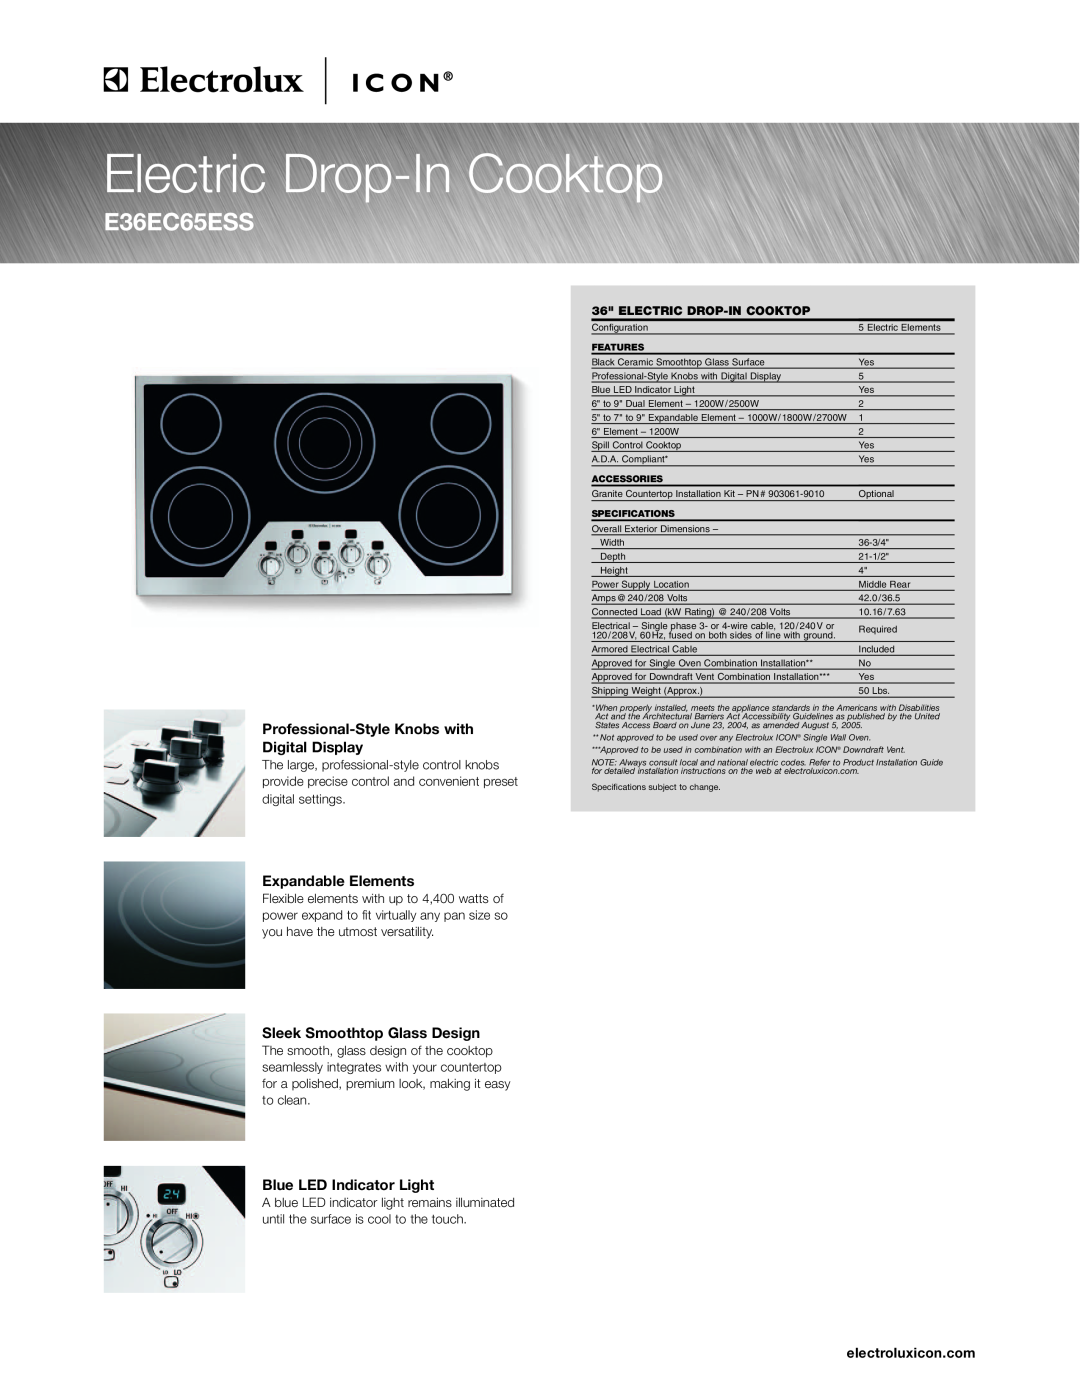 Electrolux E30GC70FSS, E30EC65ESS specifications Induction Drop-In Cooktop, E36IC75FSS, Designed for the well-lived home 